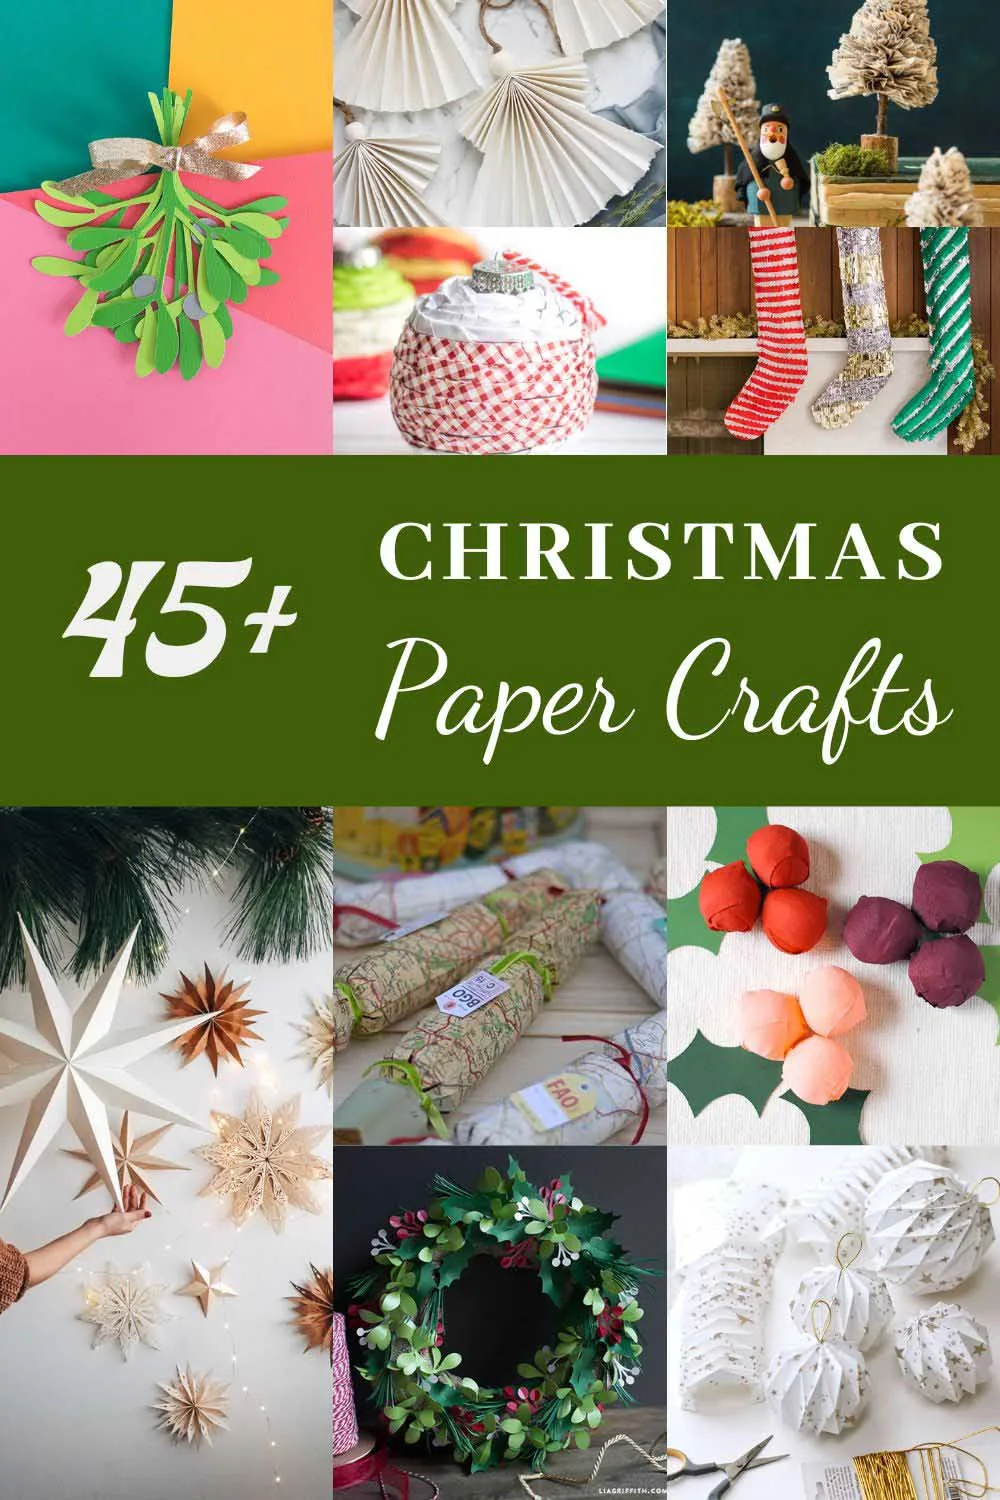 7 Pc Christmas Wrapping Paper Christmas Gifts Gifts Decorated Christmas  Kraft Paper Vintage Wrapping Paper